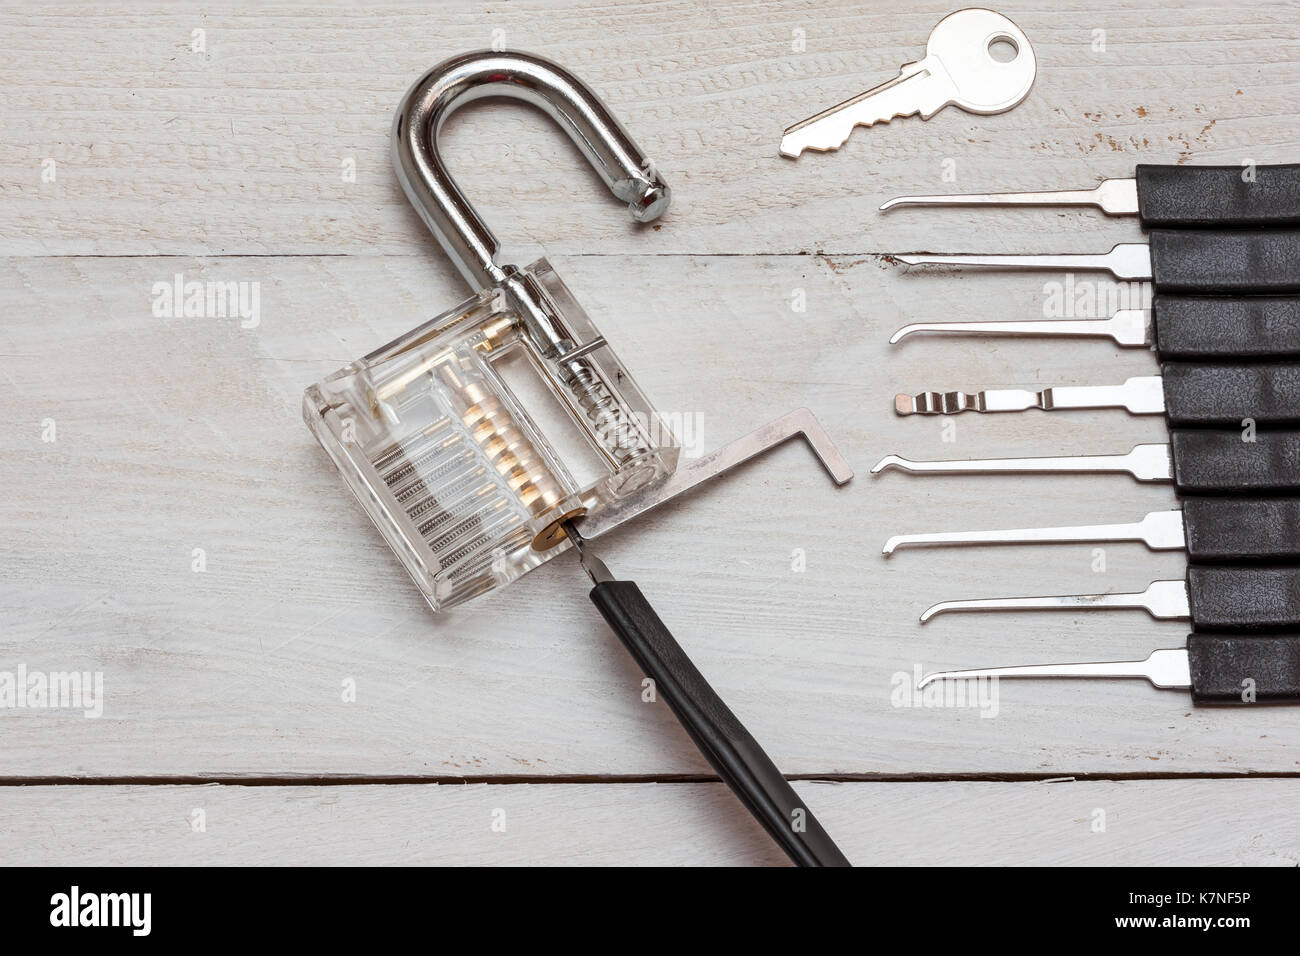 several lockpicking to open a lock on a door Stock Photo